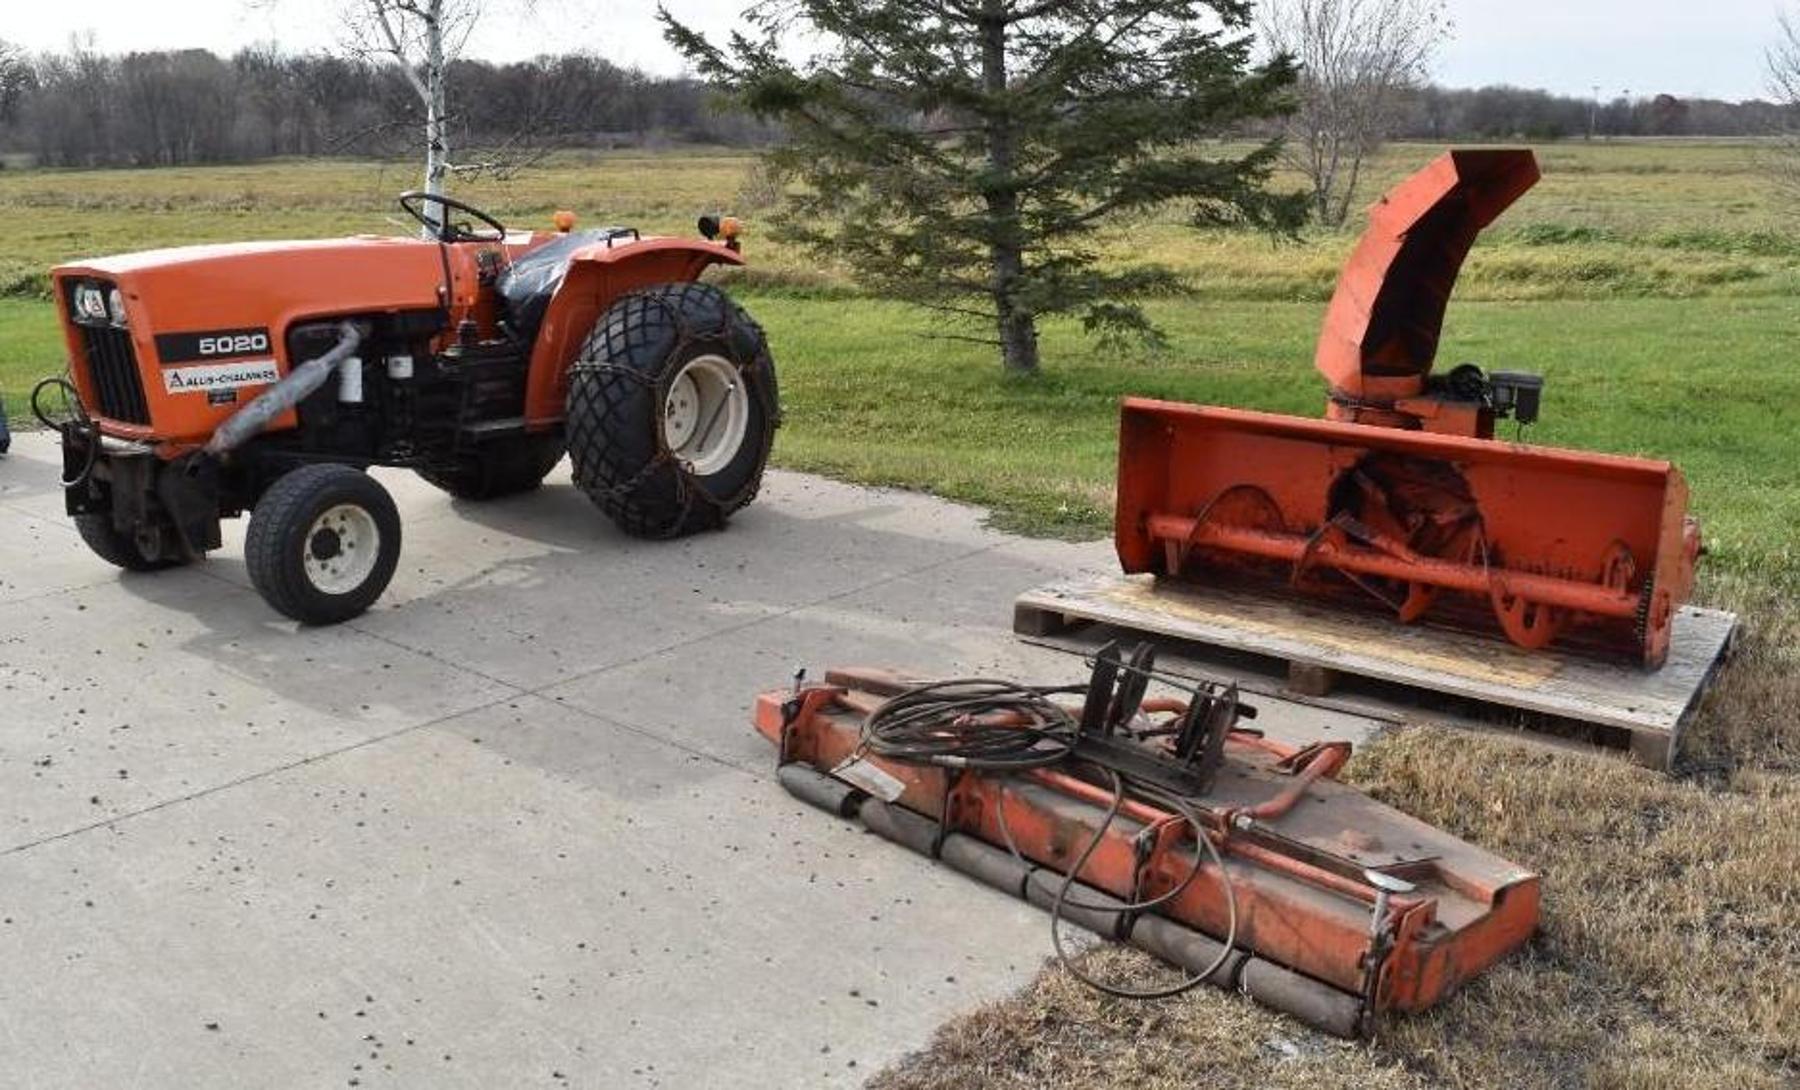 Allis Chalmers 5020 Tractor With Attachments & 1999 Felling 18' Car Hauler